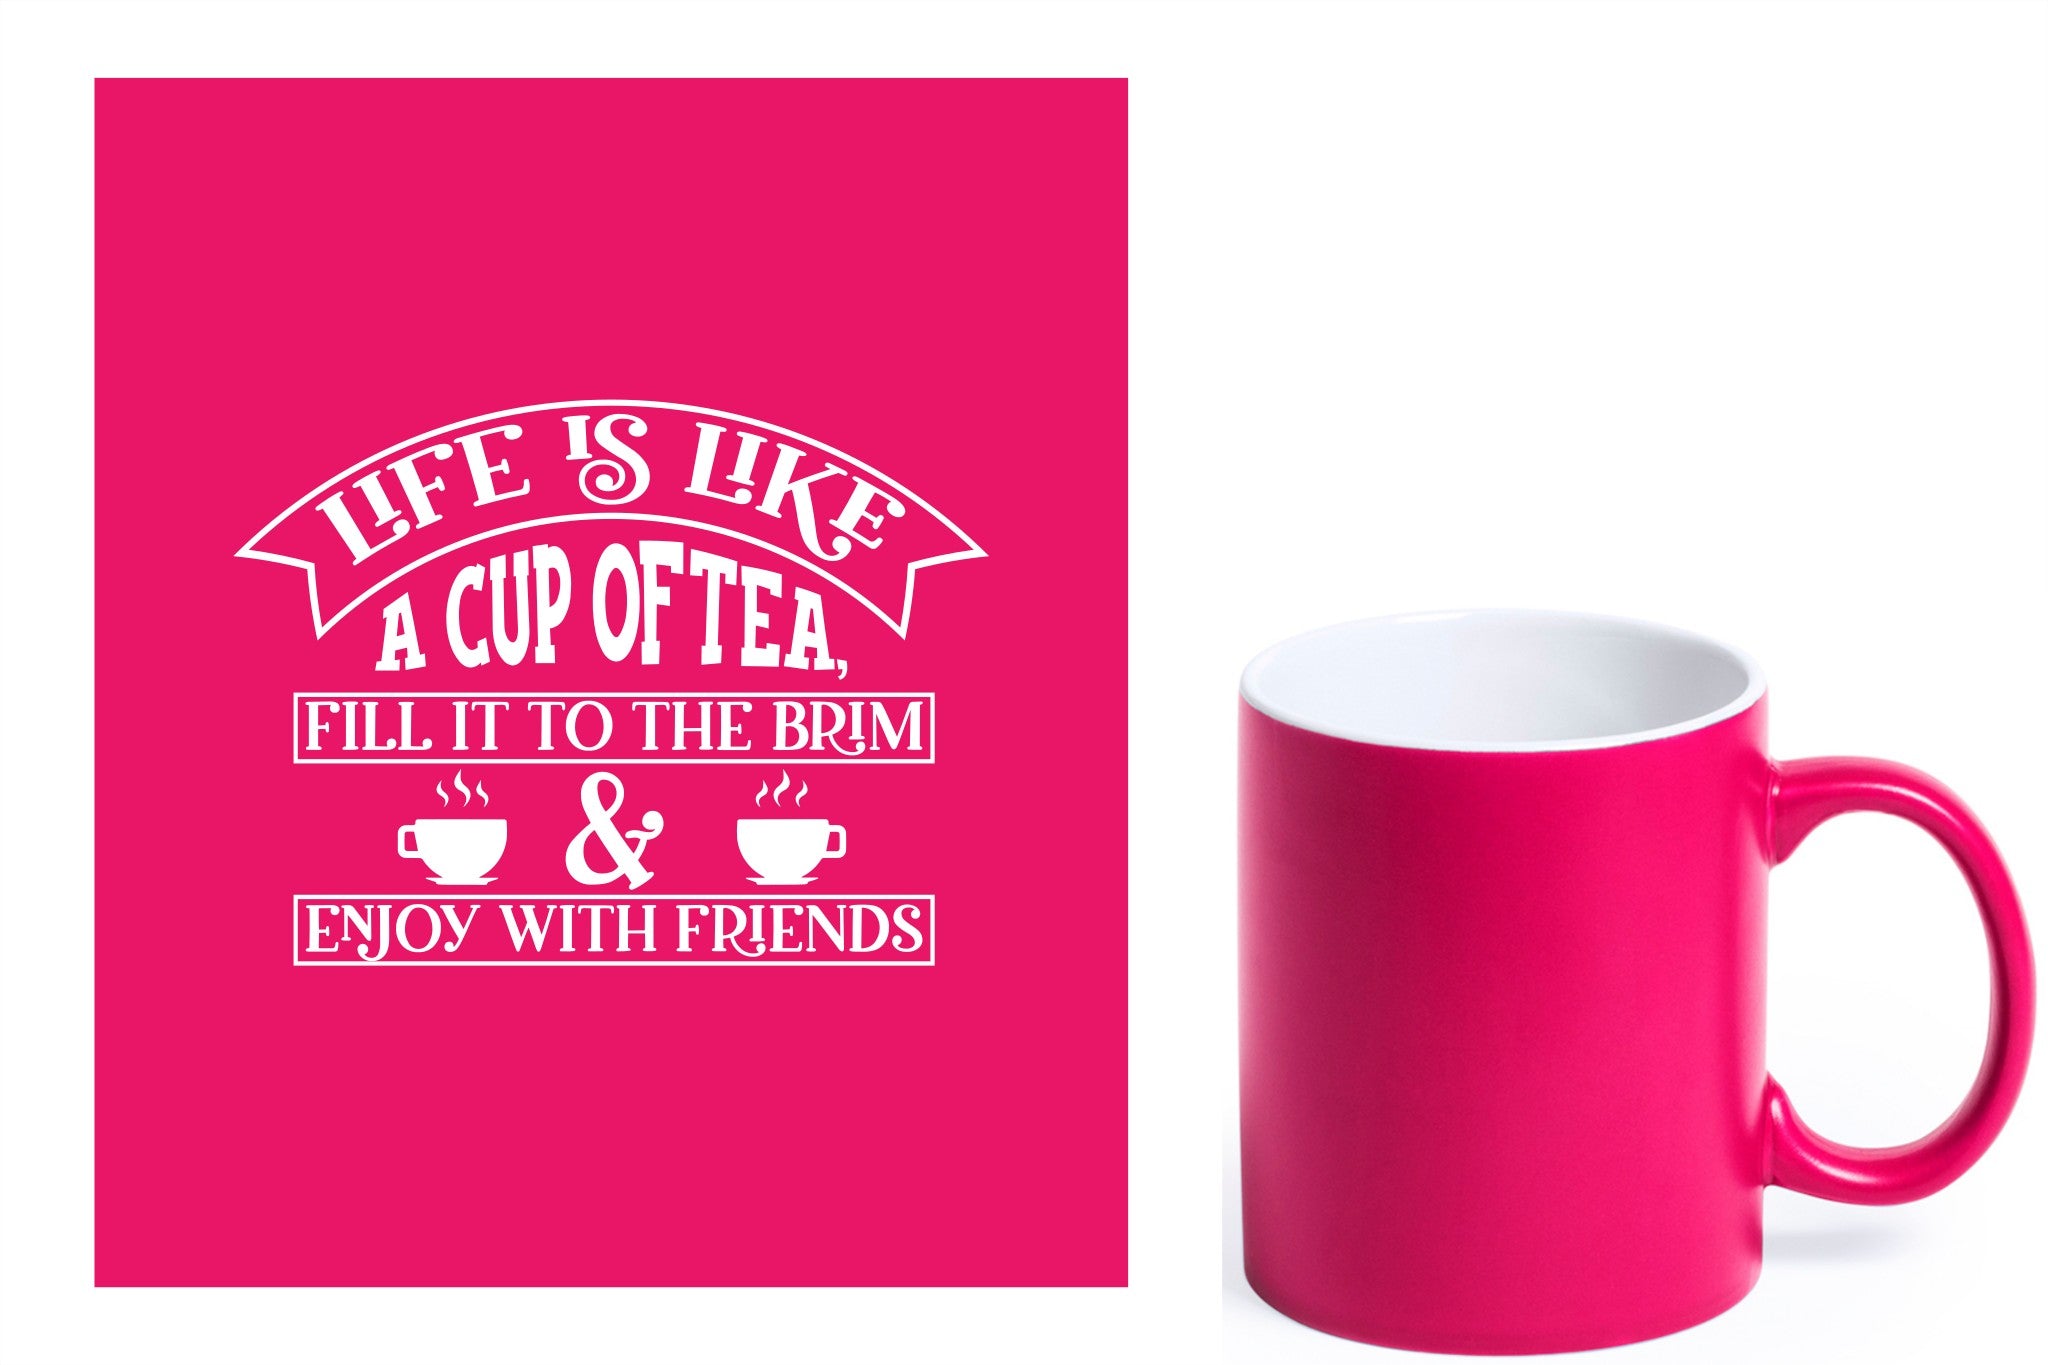 fuchsia keramische mok met witte gravure  'Life is like a cup of tea fill it to the brim & enjoy with friends'.